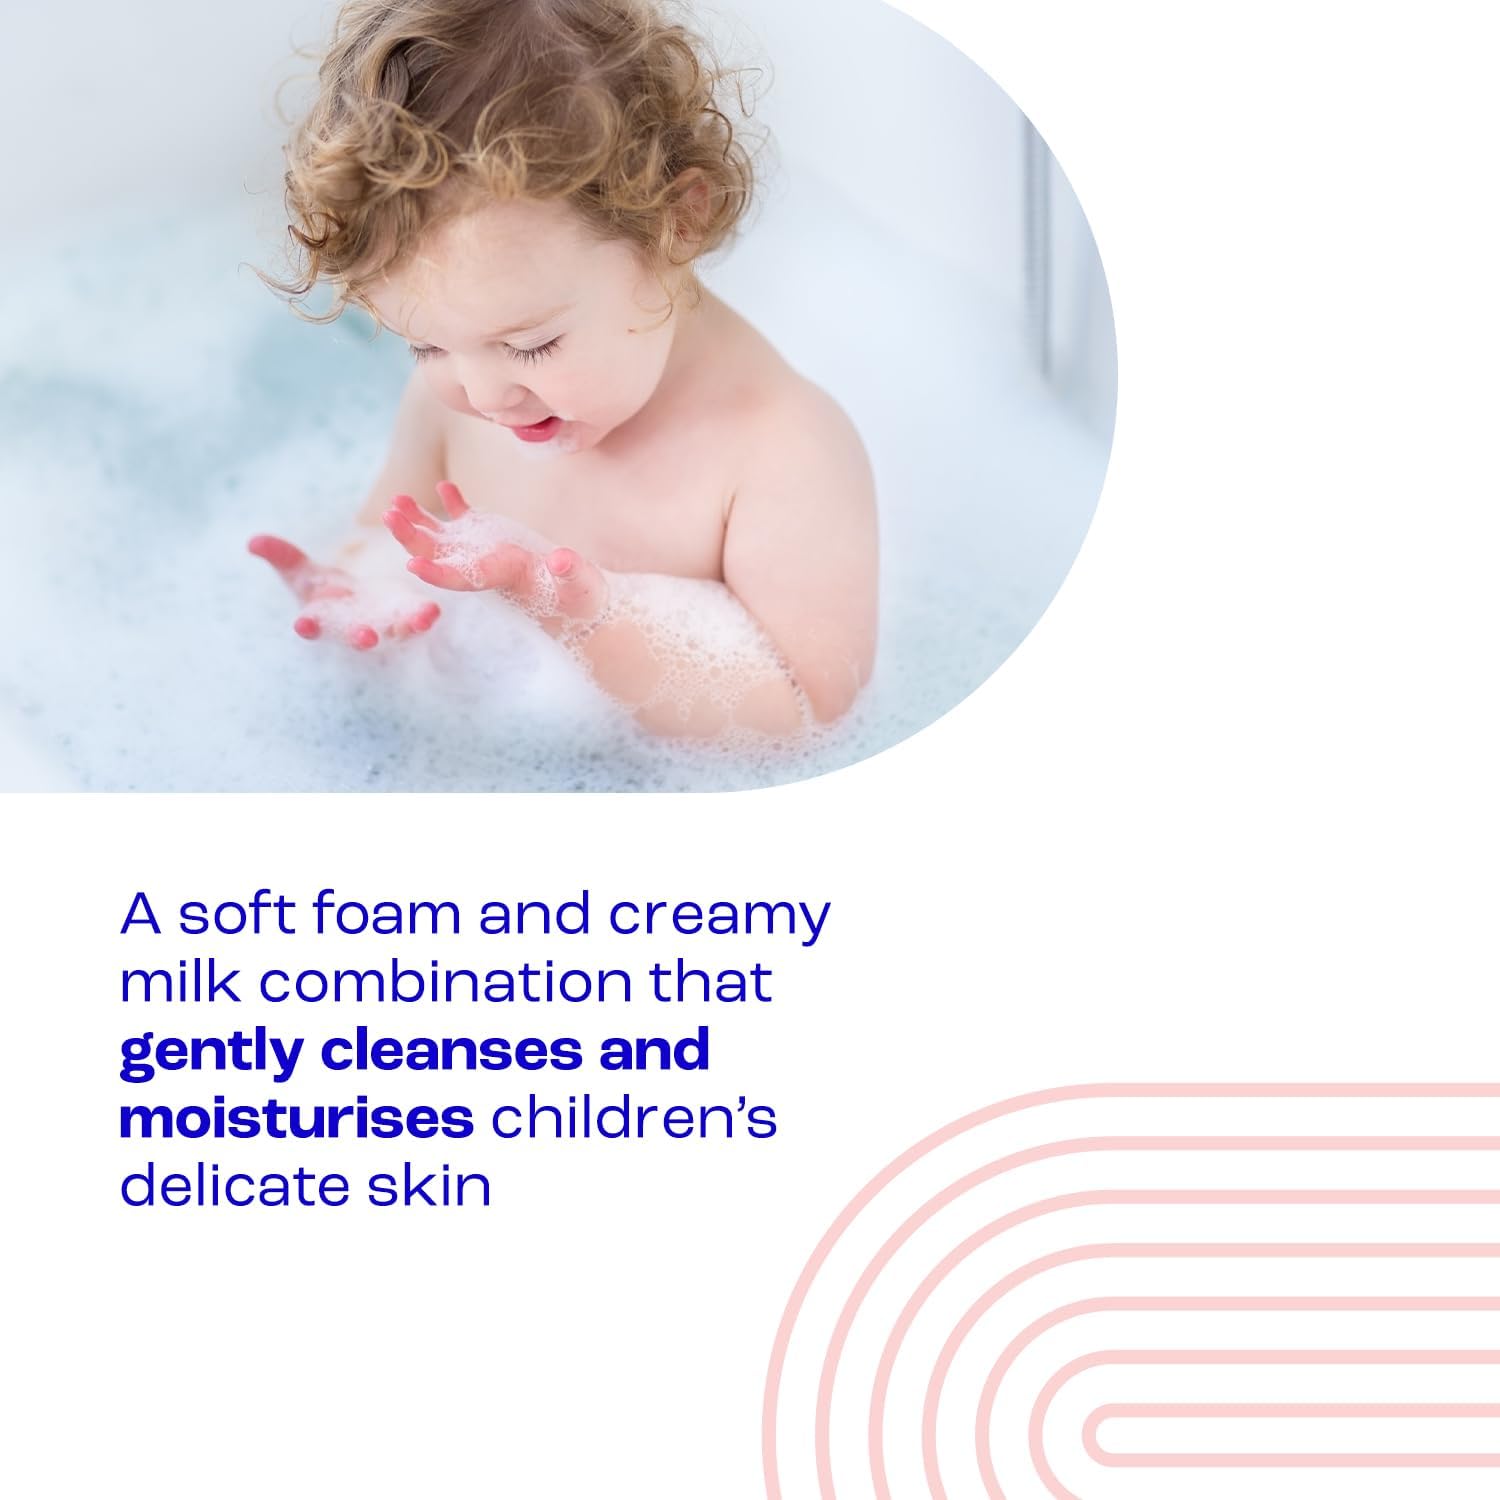 E45 Dermatological Junior Foaming Bath Milk 500 ml – Bath Foam for Kids - Soap-Free Body Wash to Protect and Moisturise Dry and Sensitive Skin – Soothe Itching and Irritation - Dermatitis Eczema Cream : Amazon.co.uk: Baby Products